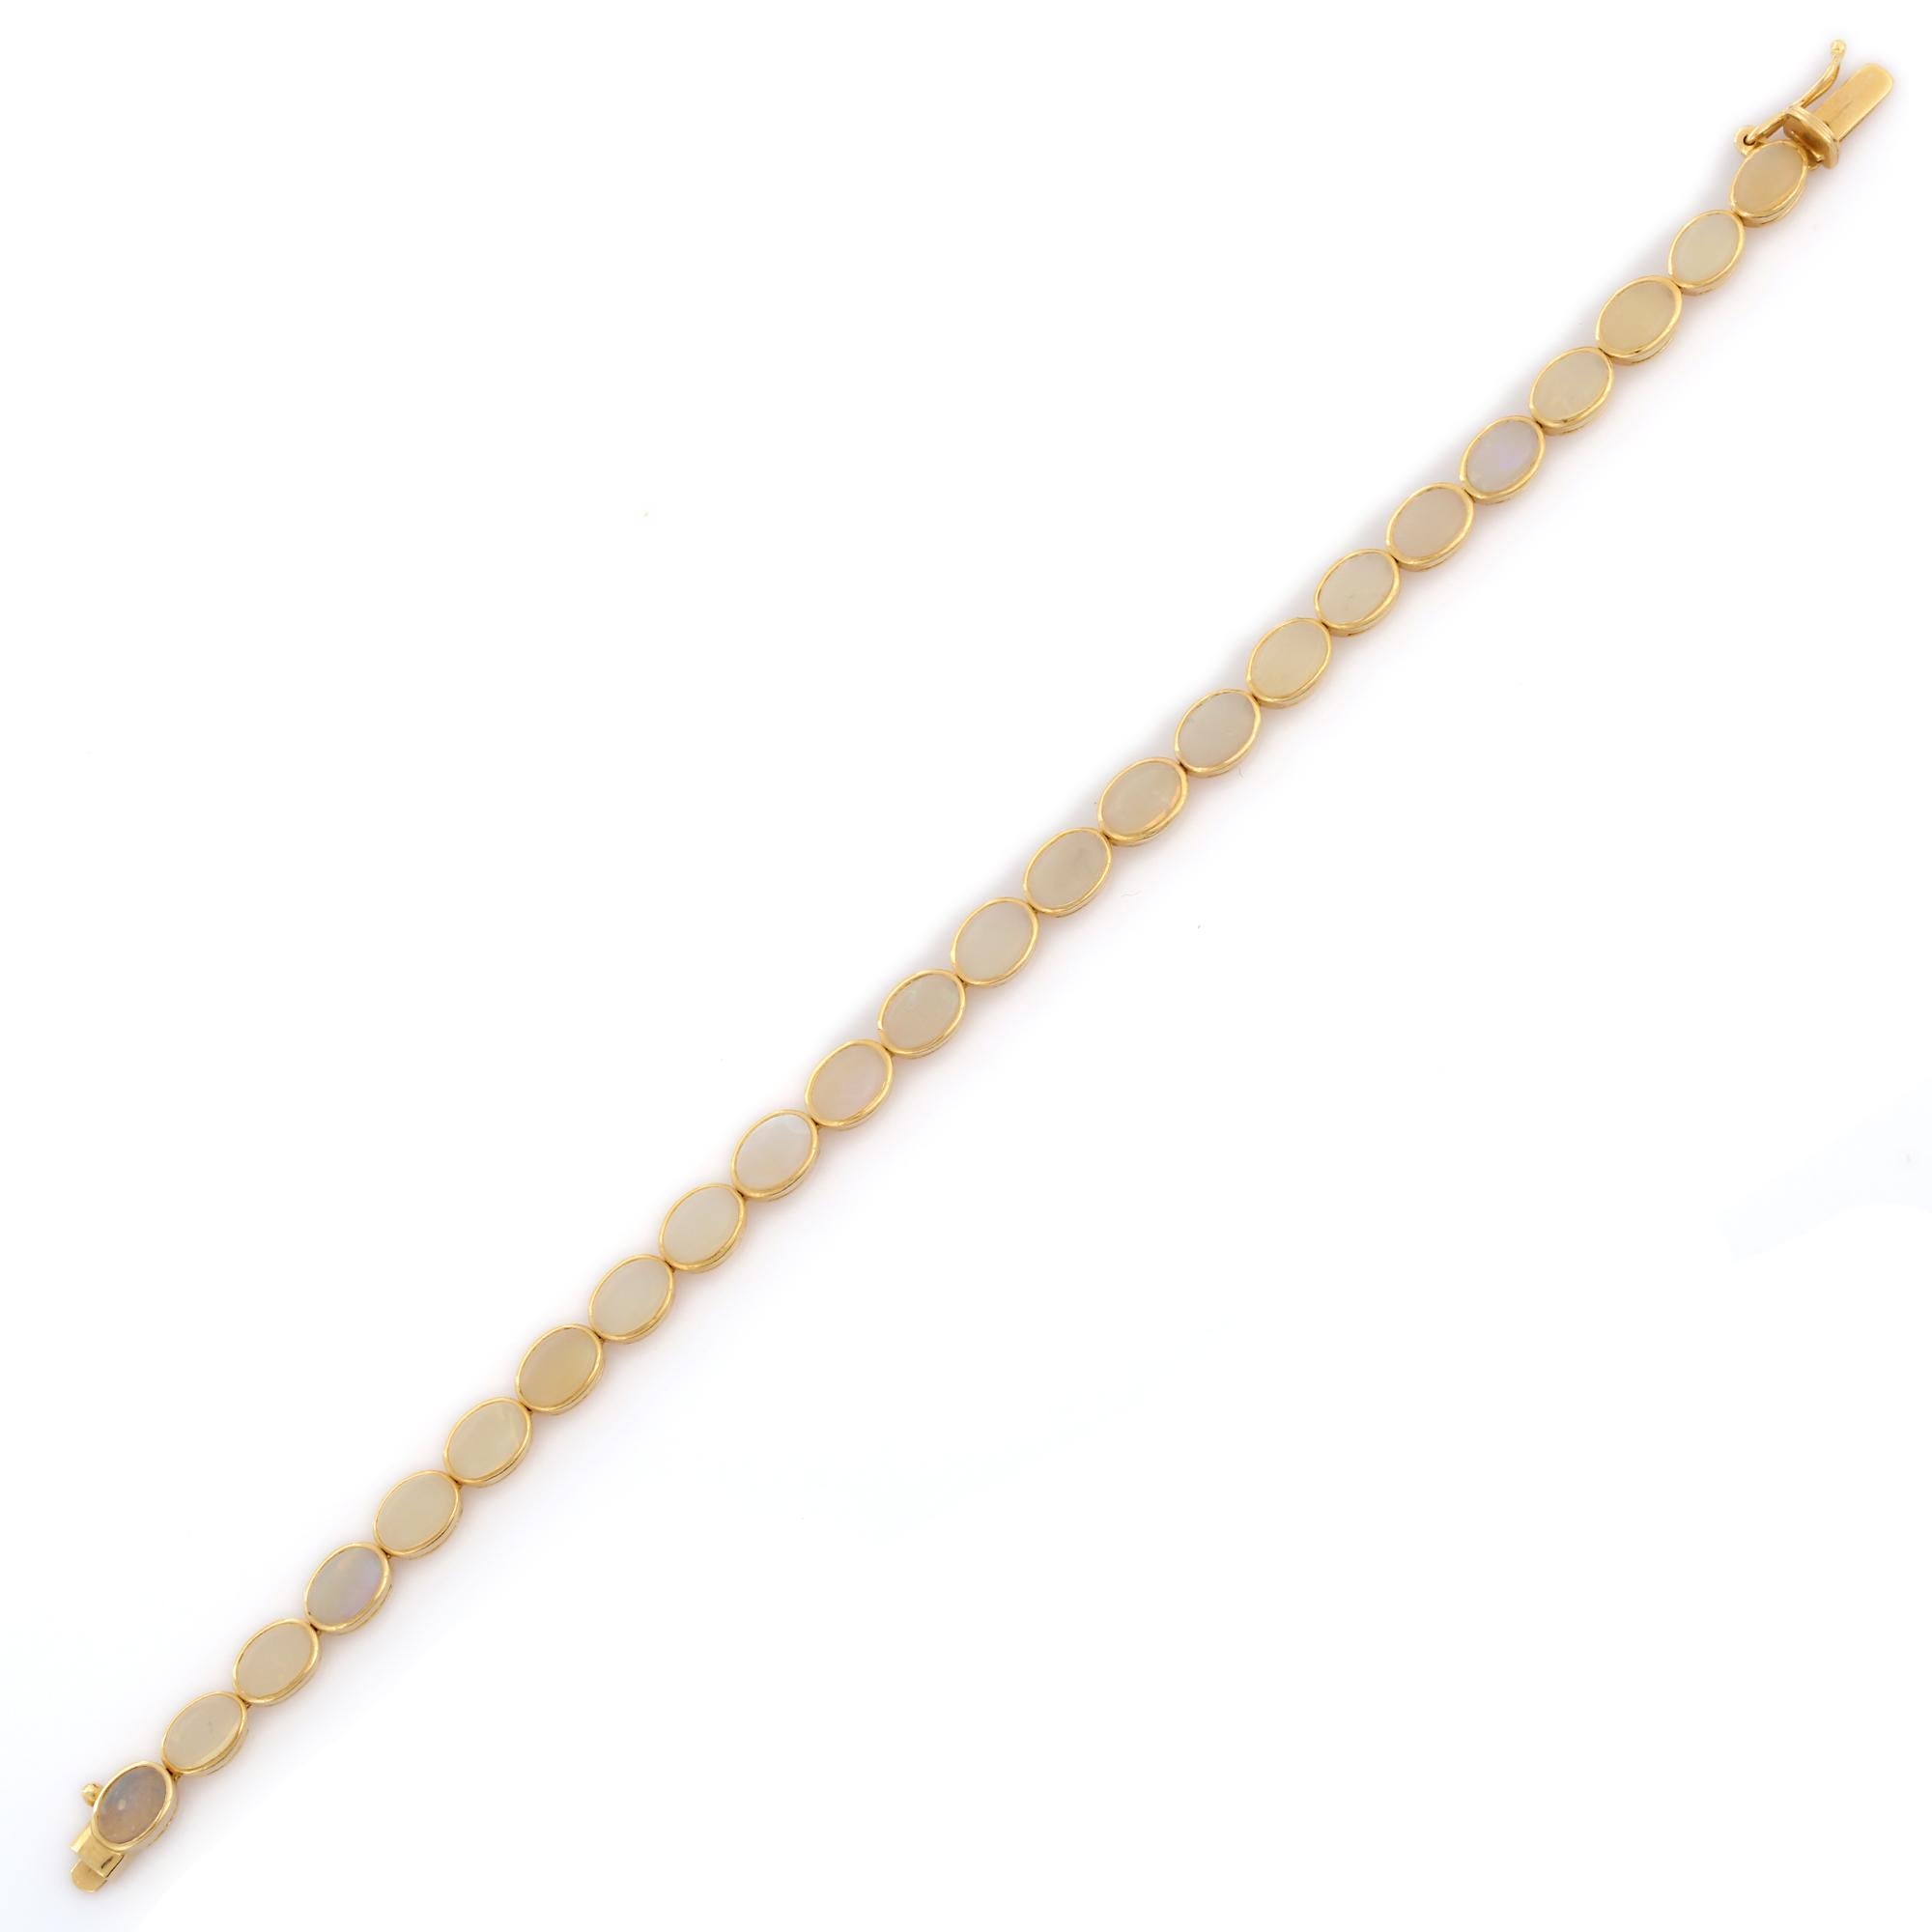 This Moonstone Tennis Bracelet in 18K gold showcases 24 endlessly sparkling natural moonstone, weighing 7.45carats. It measures 7 inches long in length. 
Moonstone gemstone brings balance, harmony and hope.
Designed with perfect oval cut moonstone